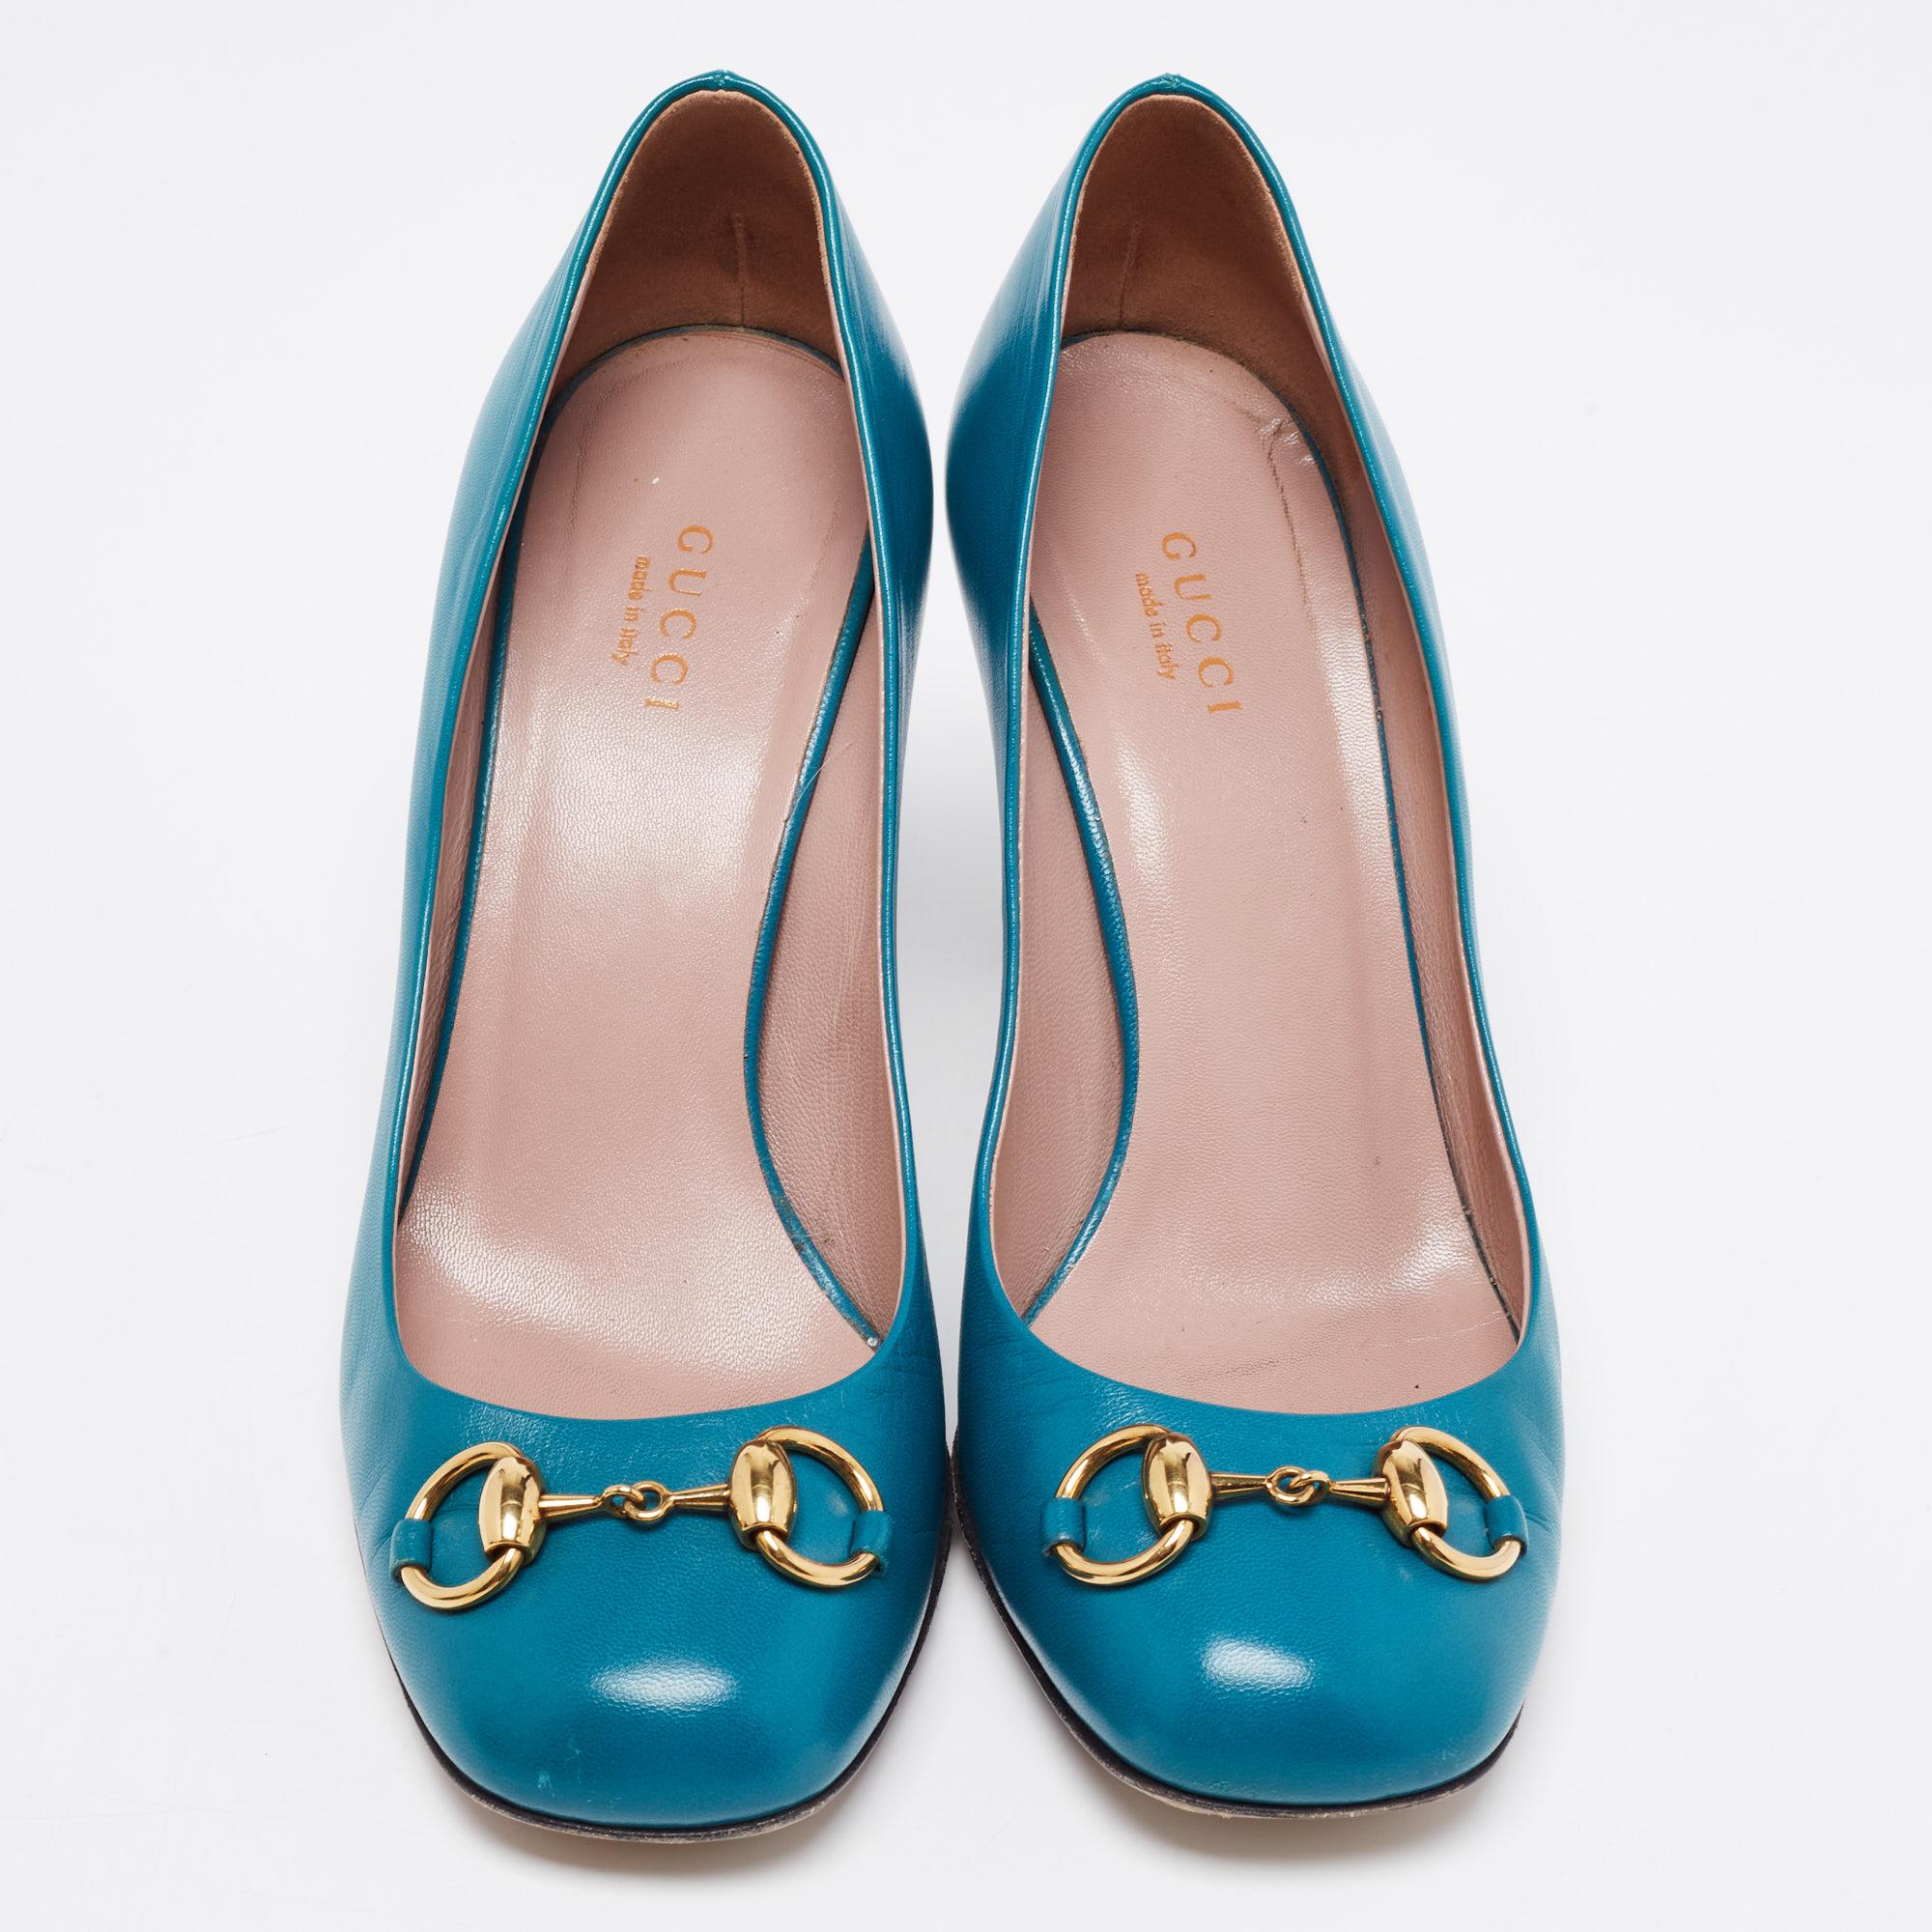 Gucci's Jolene pumps are a classy and chic creation that is impossible to resist! From formal outfits to casual attires, these pumps are perfect to wear. This version of the Jolene pumps is made from teal leather and highlighted with a gold-tone